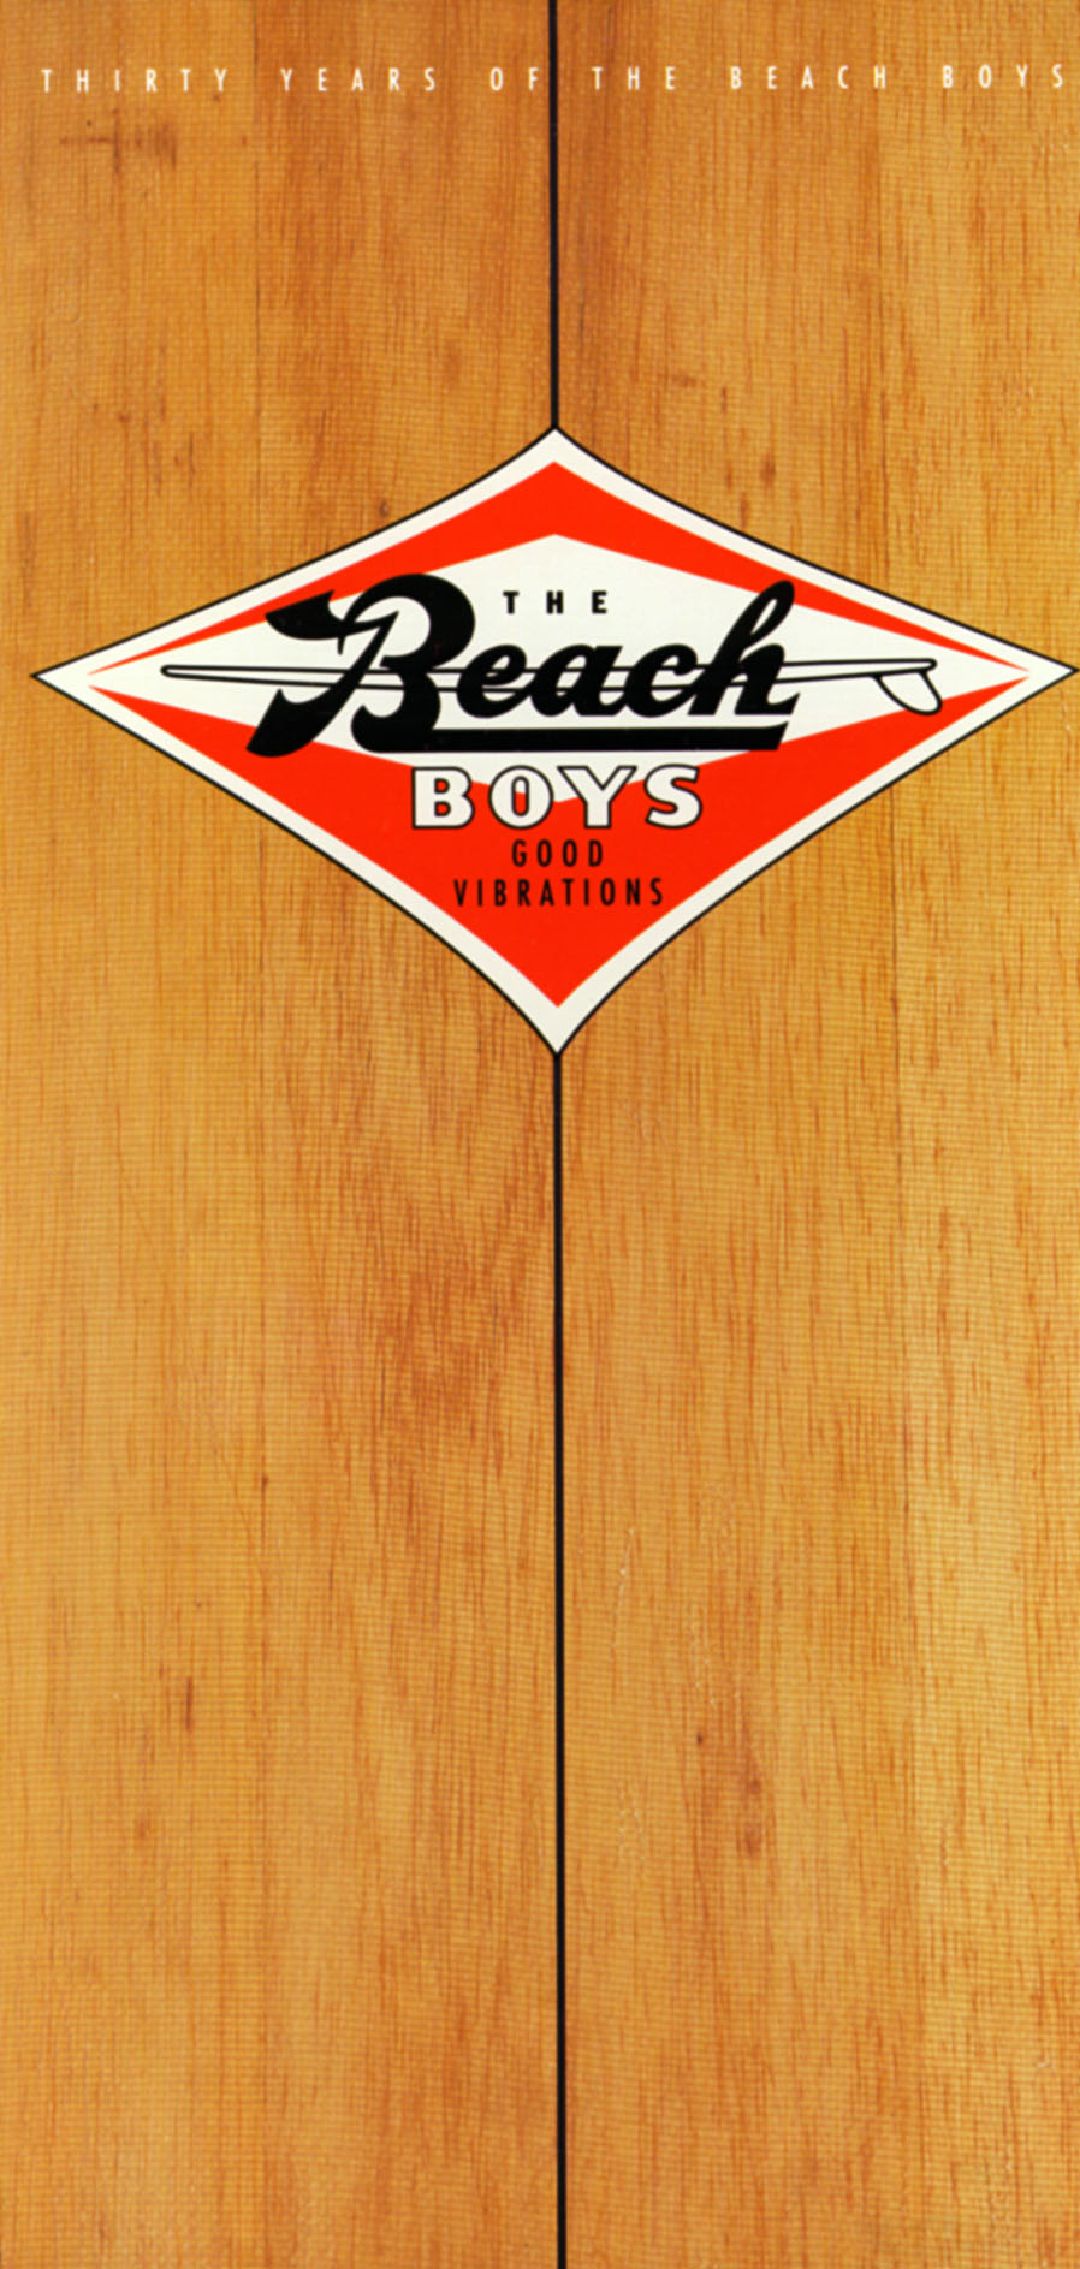 Good Vibrations: Thirty Years Of The Beach Boys cover